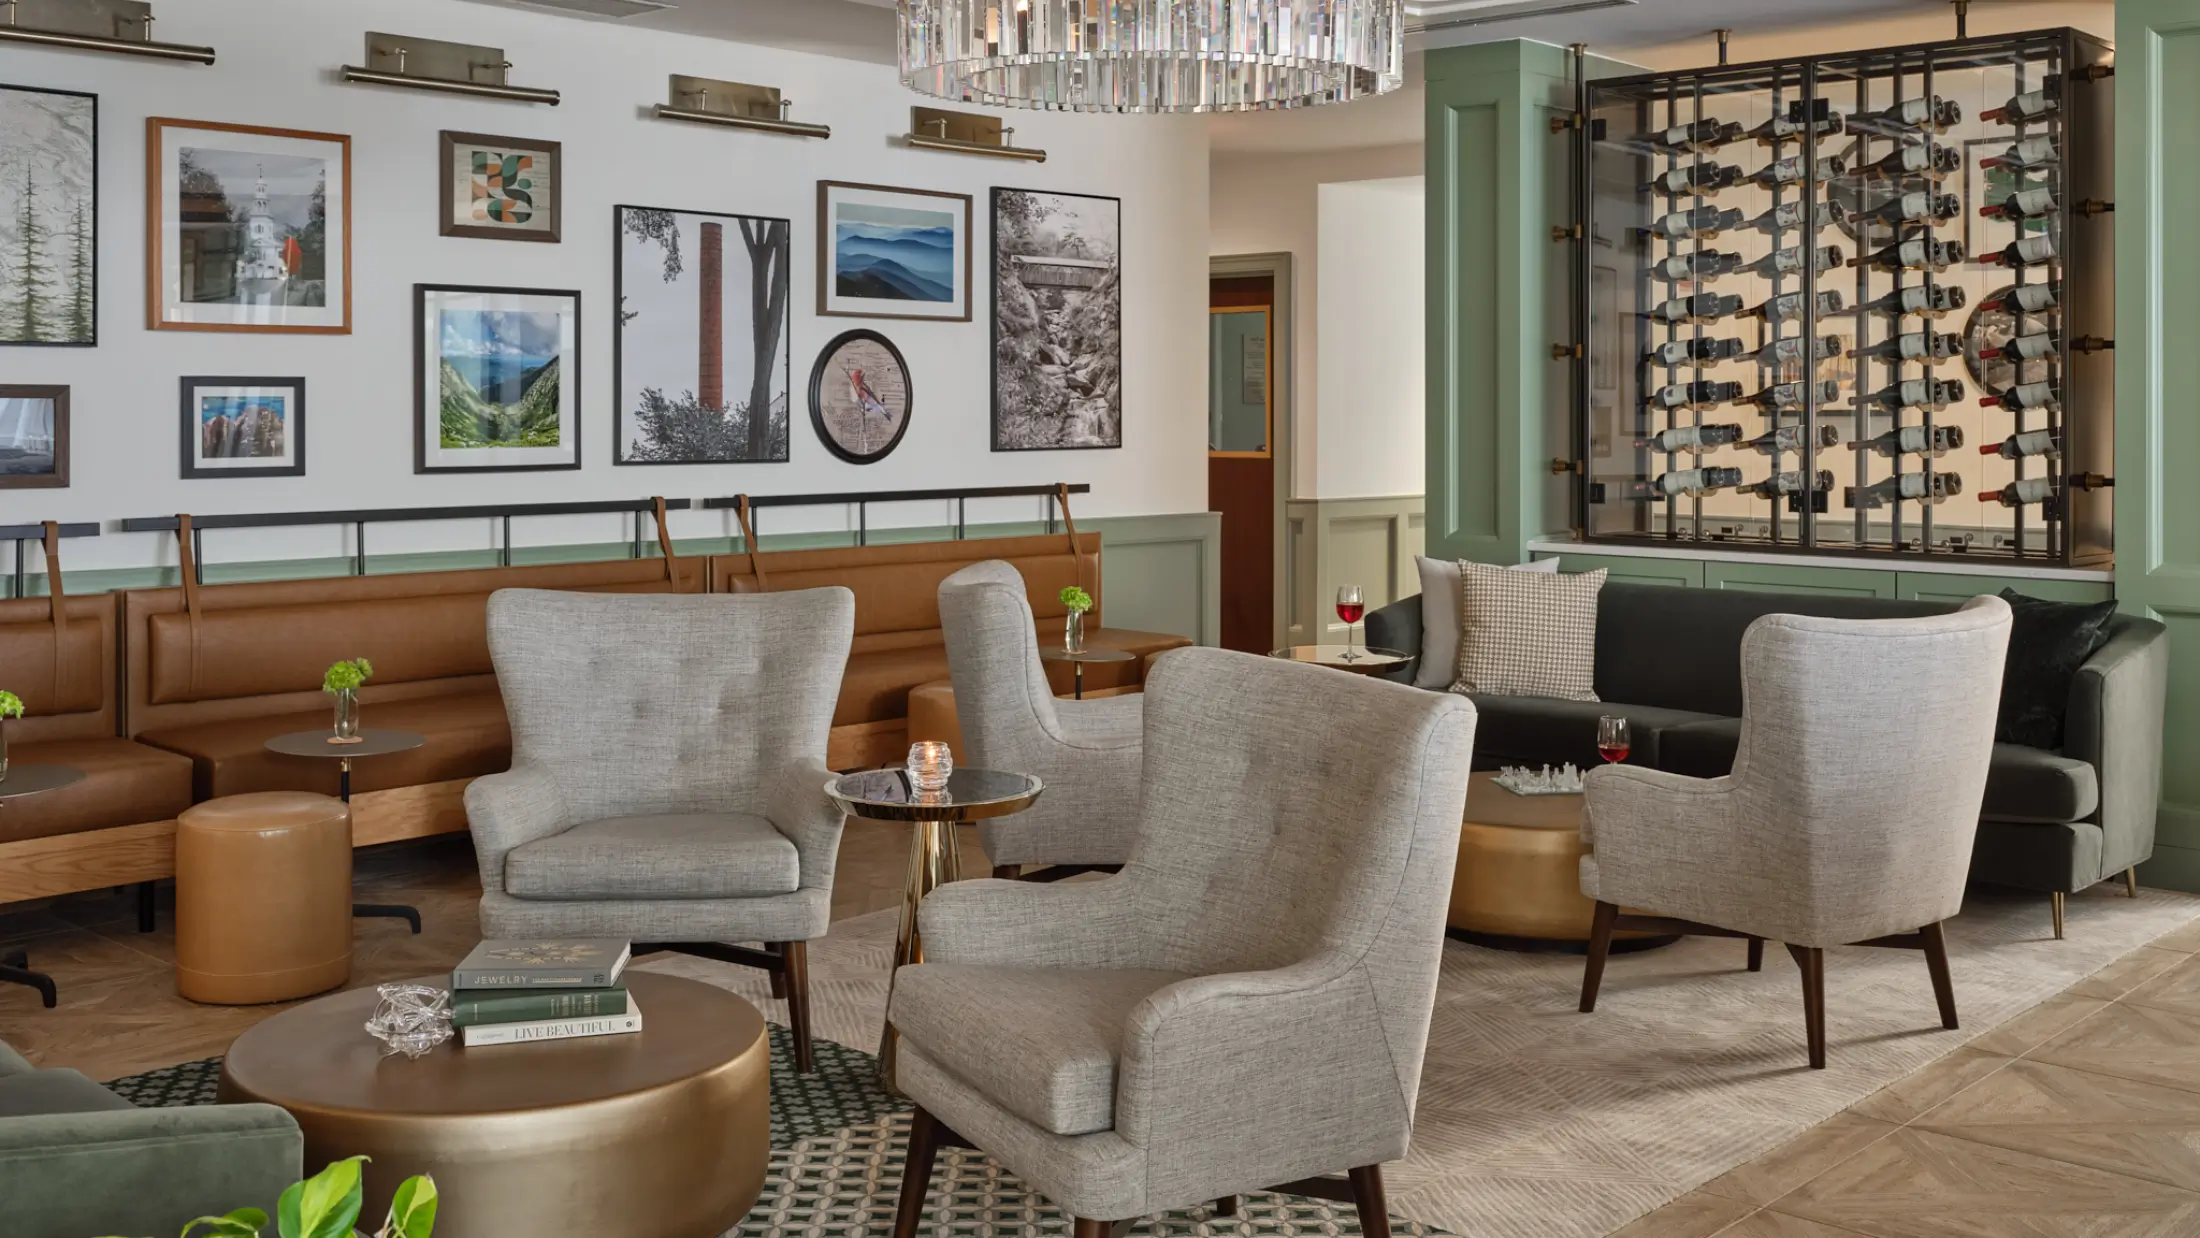 Art wall and wine bottle display create welcoming setting in Six South St Hotel lounge.